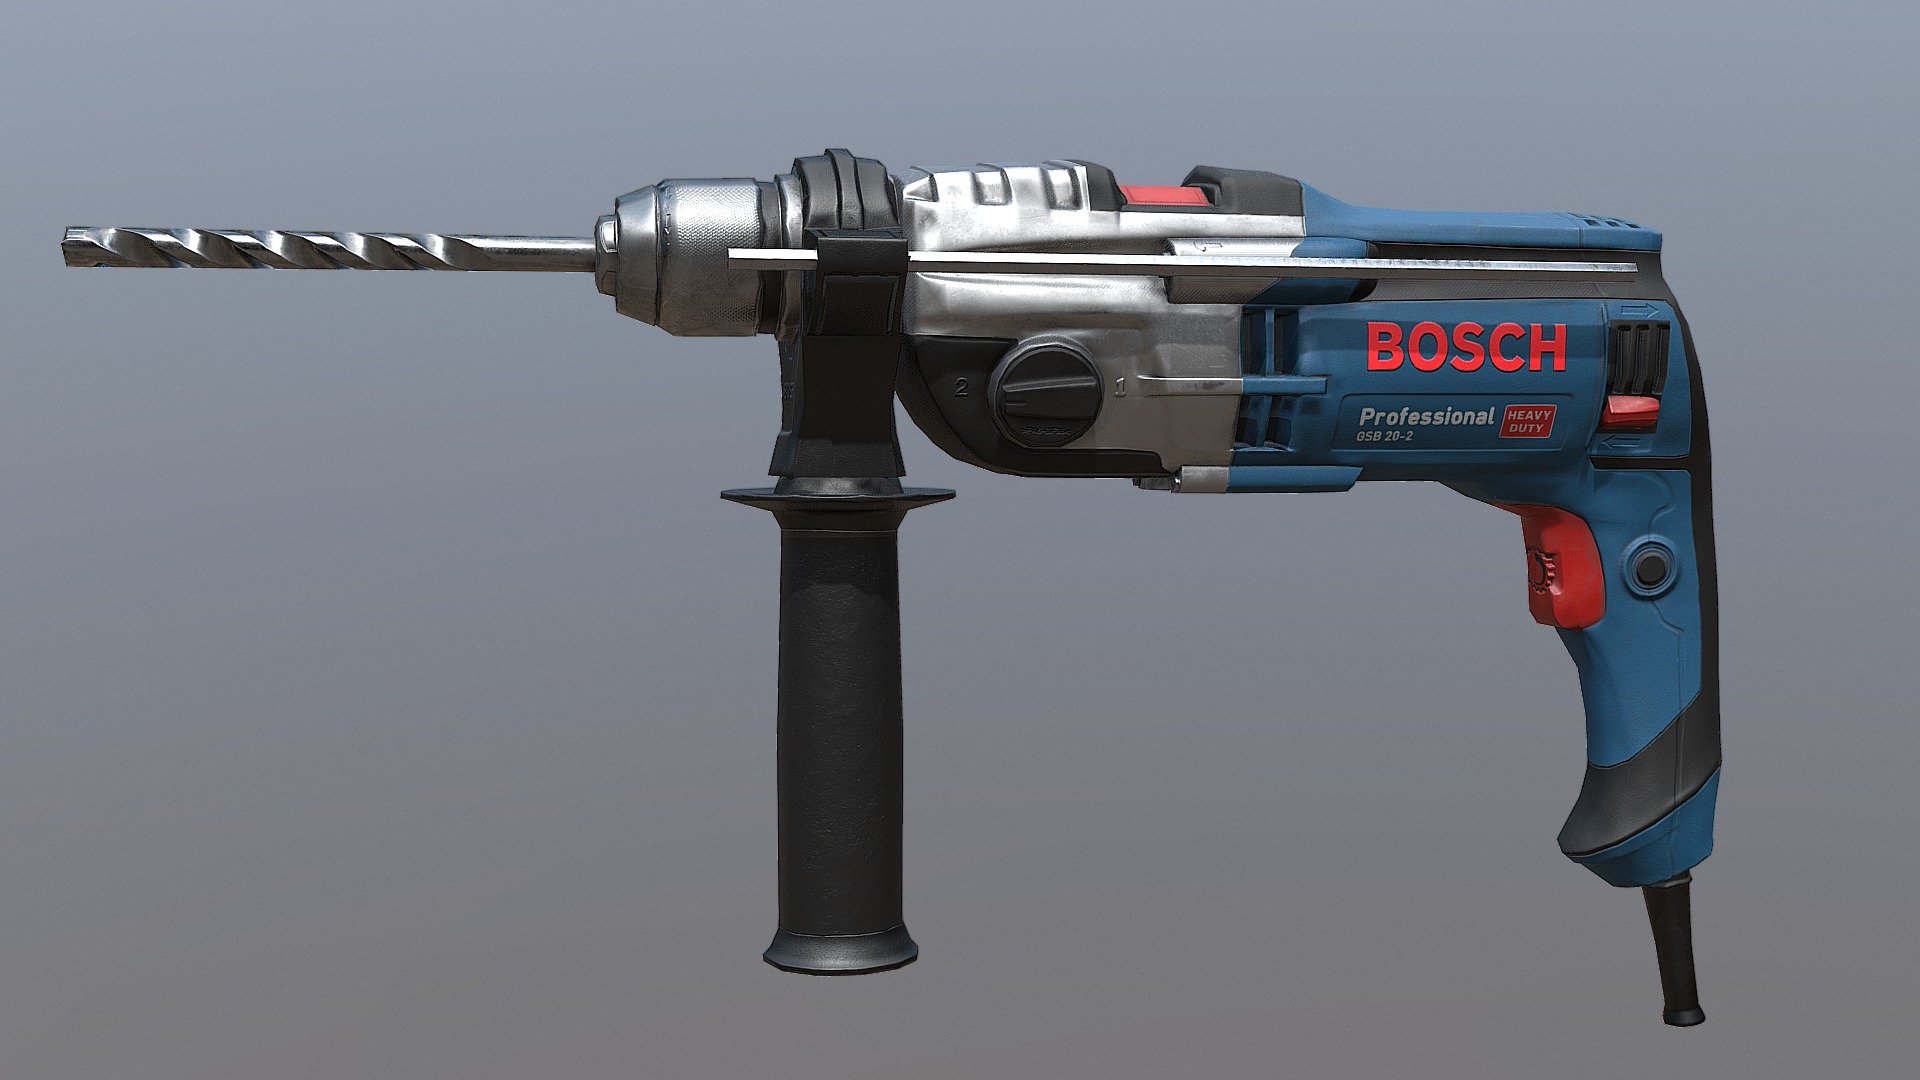 This hammer drill took me 80 hours, 3 mental breakdowns and 1 trip to hardware store. It's the most realistic and complex model I've made so far.
Although it was challenging, I'm glad I made it and practiced more realistic models apart from my beloved stylized and fantasy ones!
The drill was bought new and used for a week on a construction site.
The exact name of the drill is BOSCH GSB 20-2 PROFESSIONAL.

I didn't use the height map in renders.
The only part I'm not satisfied with is normal map on cylinders - definitely room for improvement and more practice :) - BOSCH Hammer/Impact Drill - 3D model by Aleksandra (@yarpenna) 3d model